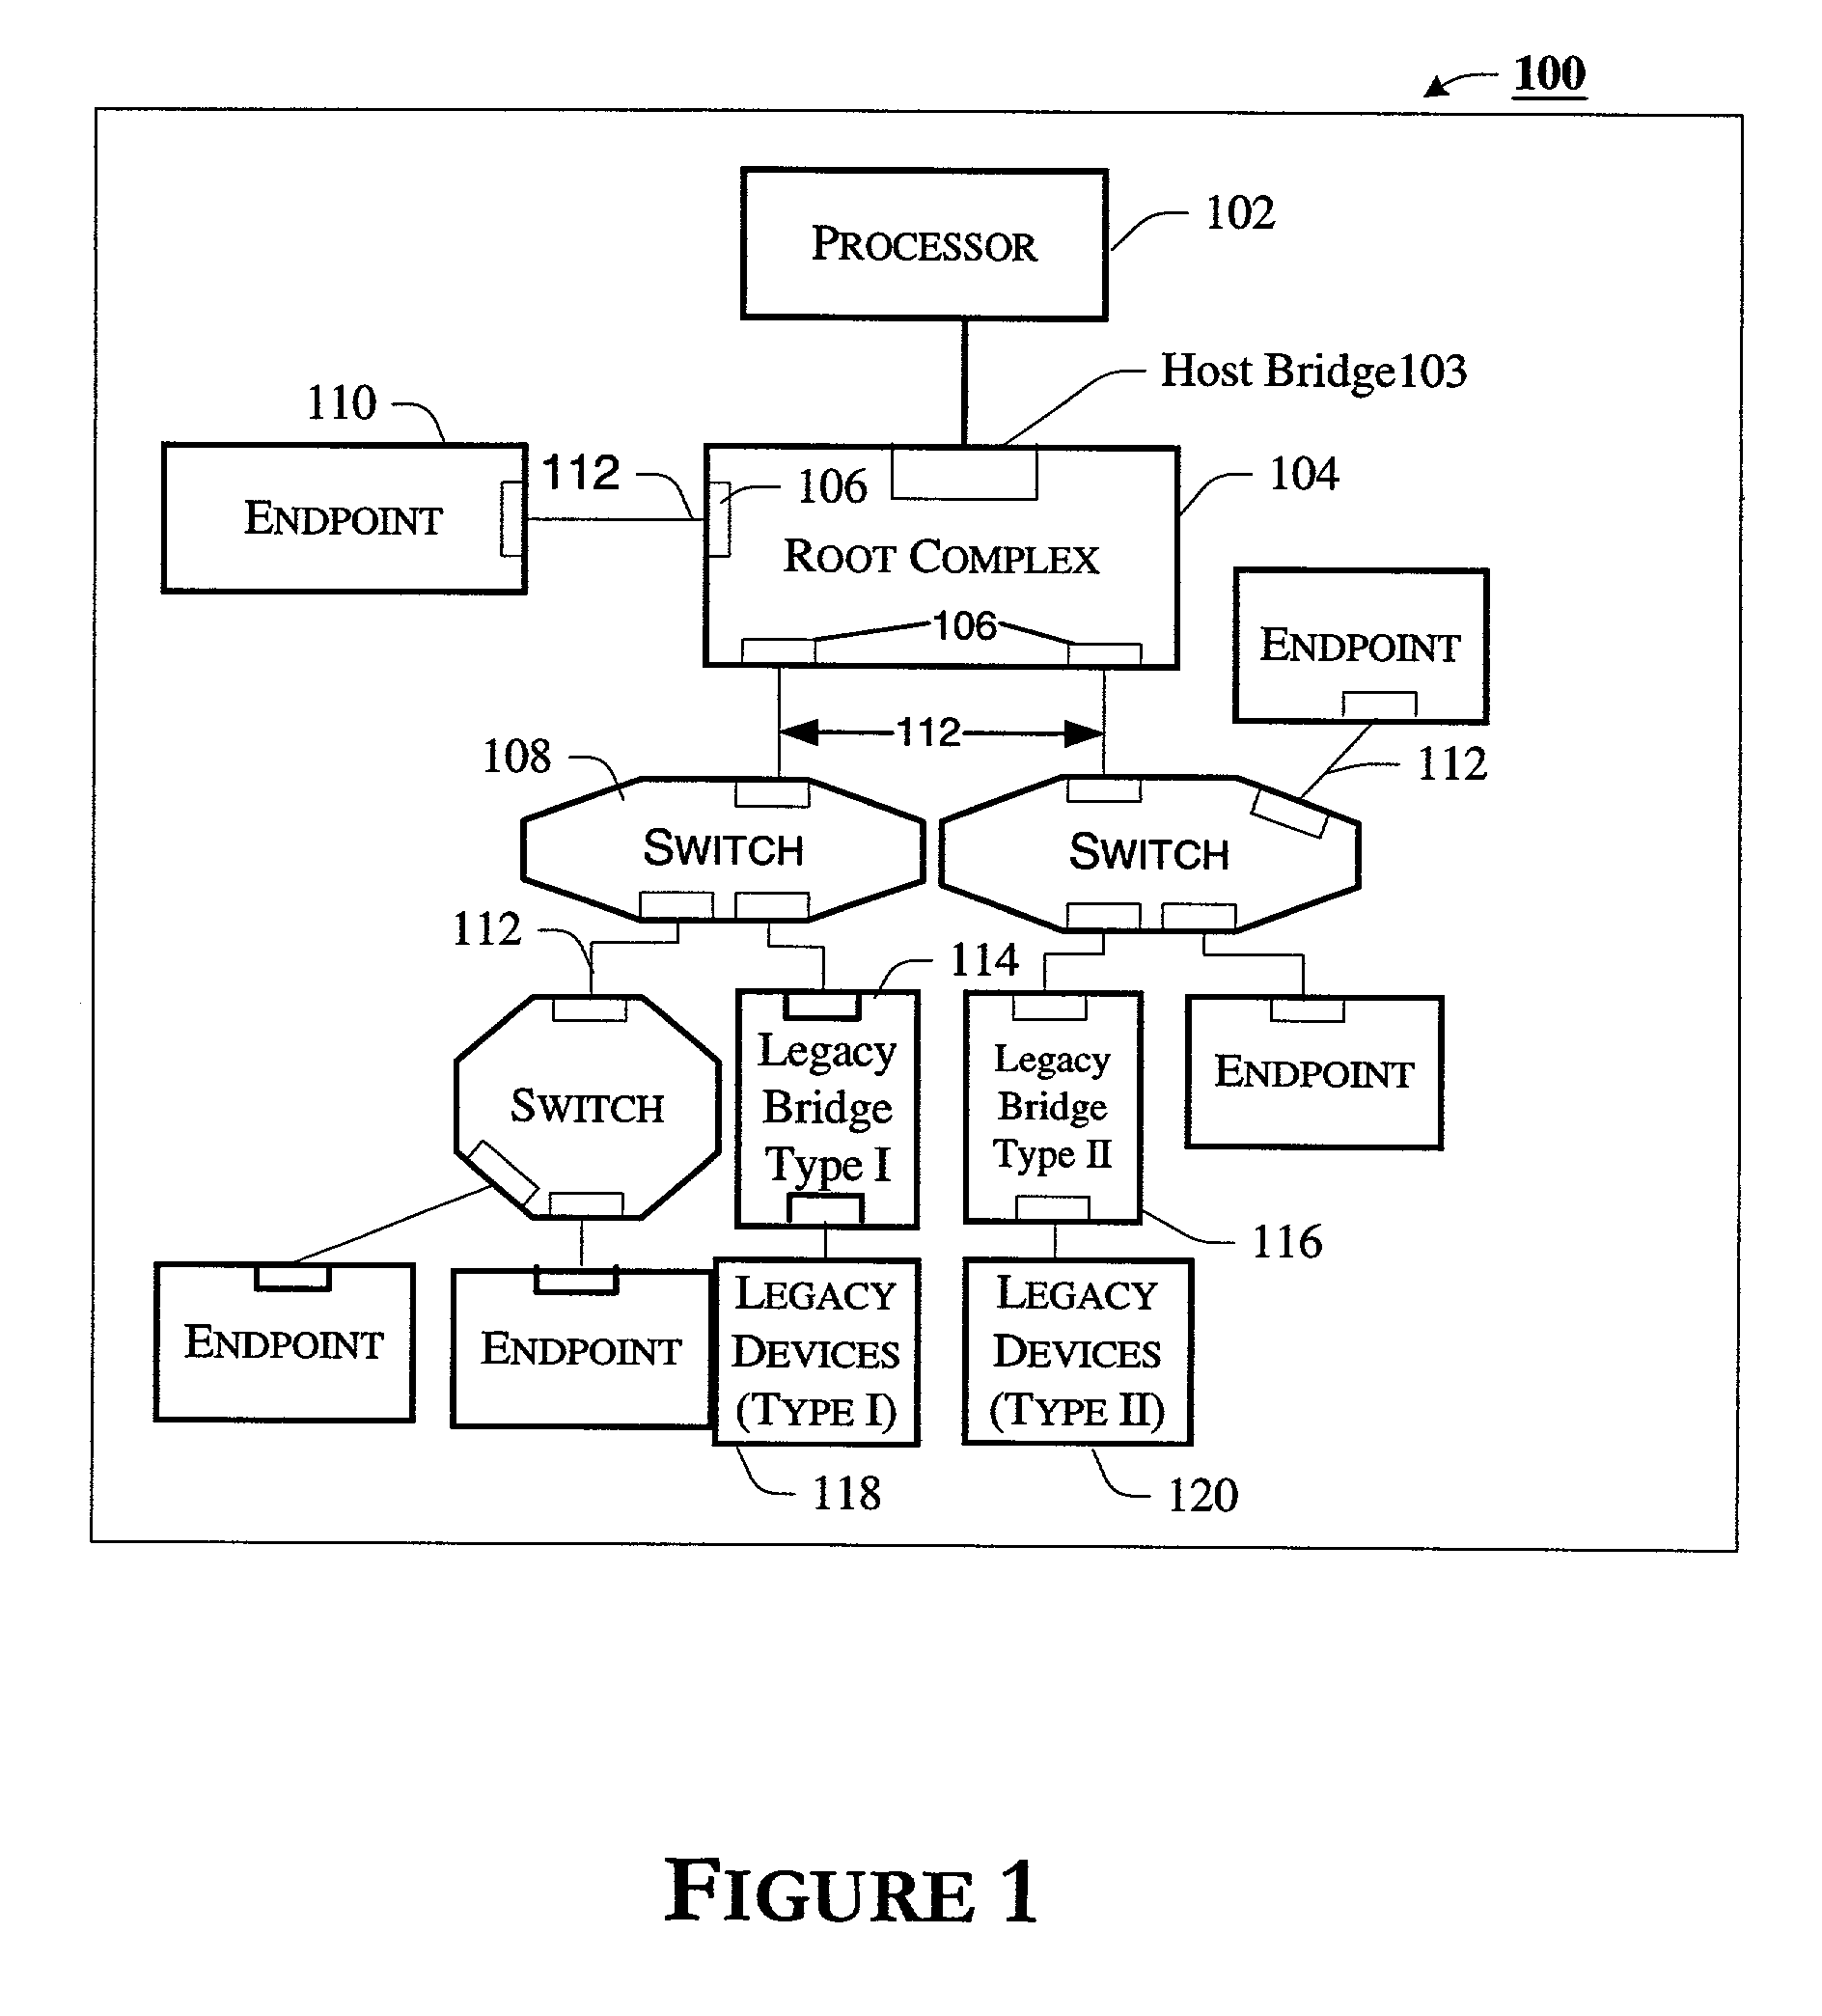 Communicating transaction types between agents in a computer system using packet headers including format and type fields